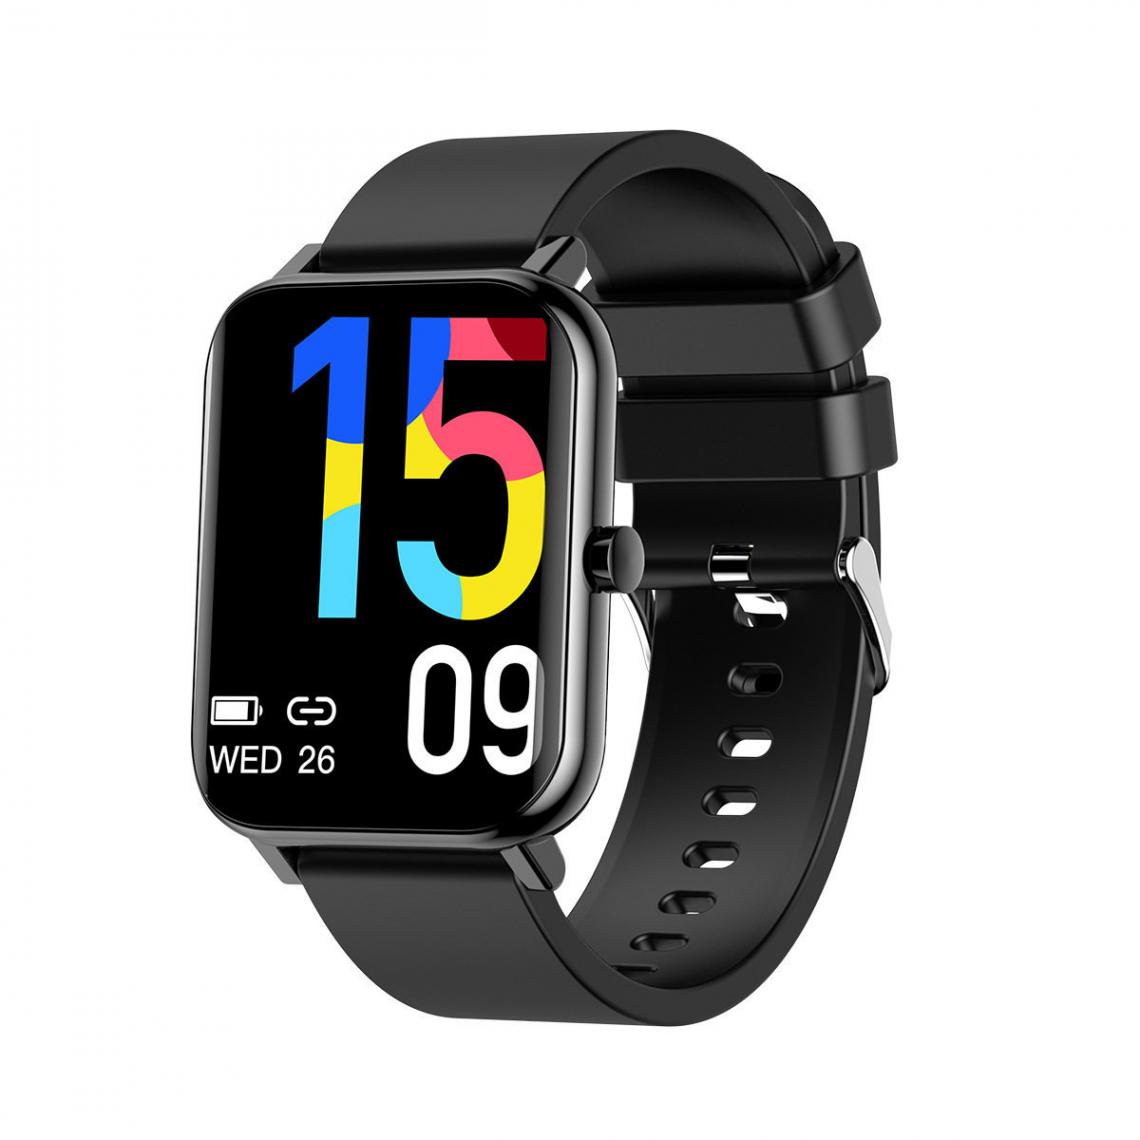 Chronotech Montres - Smart Watch 1.70 inch HD Curved Full Touch Screen Fitness Watch Heart Rate Blood Pressure Sleep Tracker Voice Control Sports Smart Watches(black) - Montre connectée